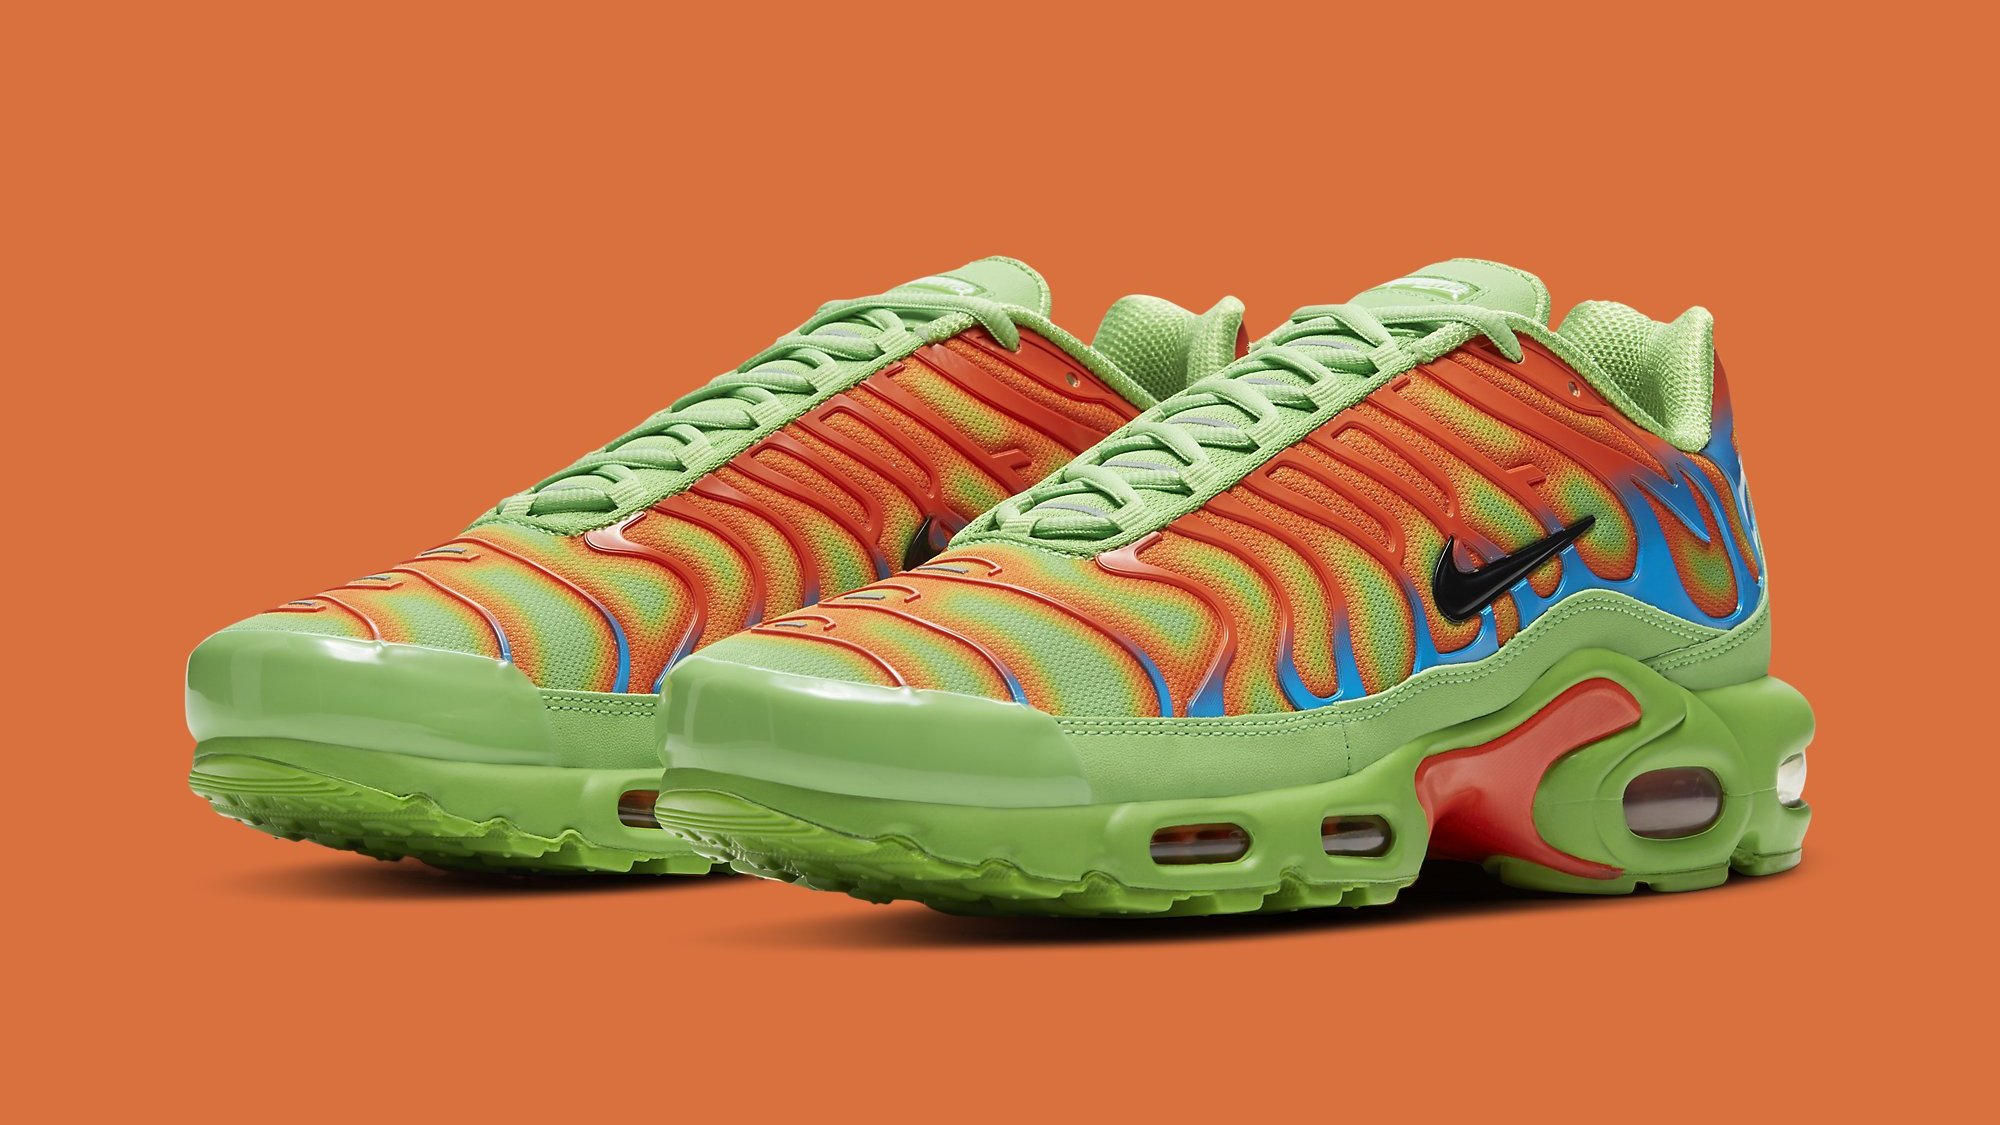 Supreme's Nike Air Max Plus Collabs Are Releasing Again | Complex